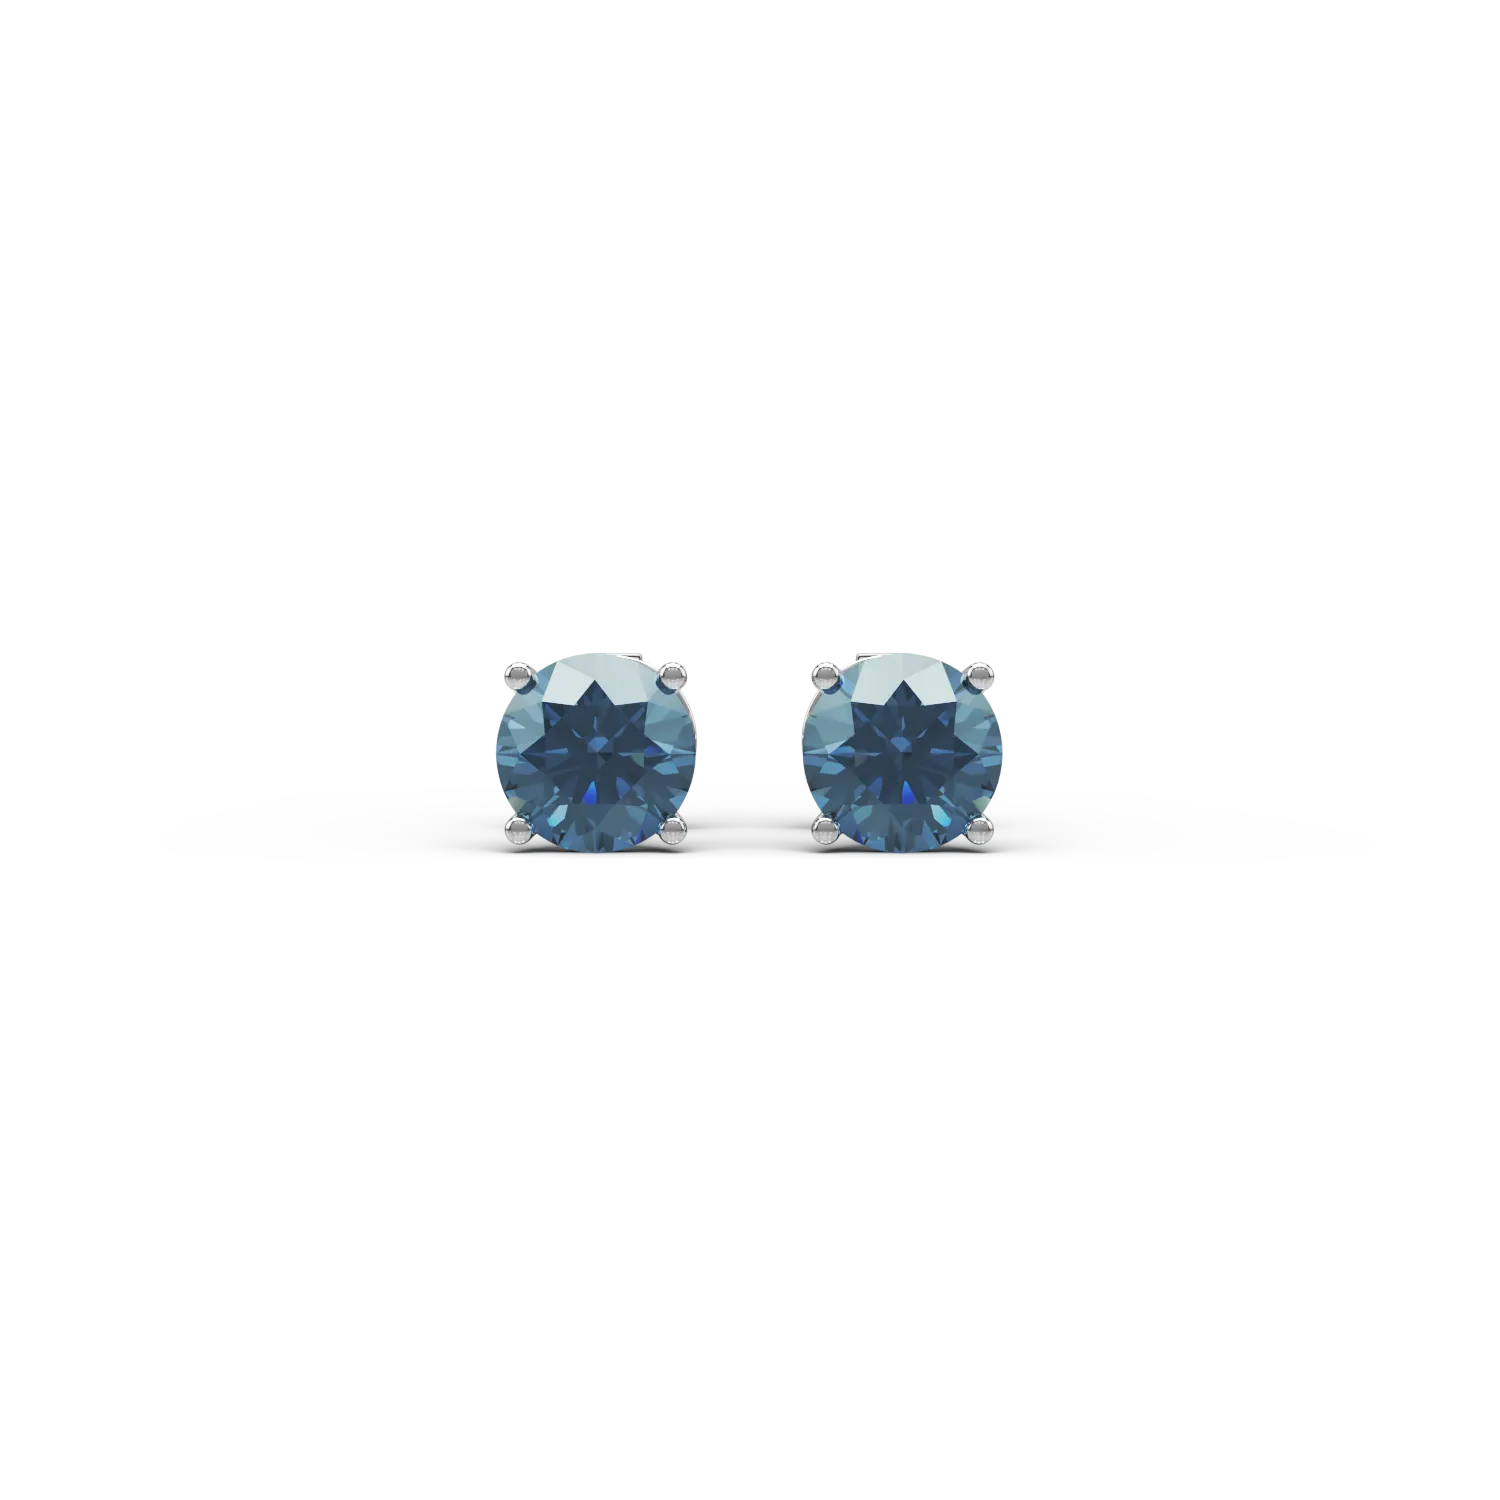 White gold earrings with 1.3ct london blue topazes